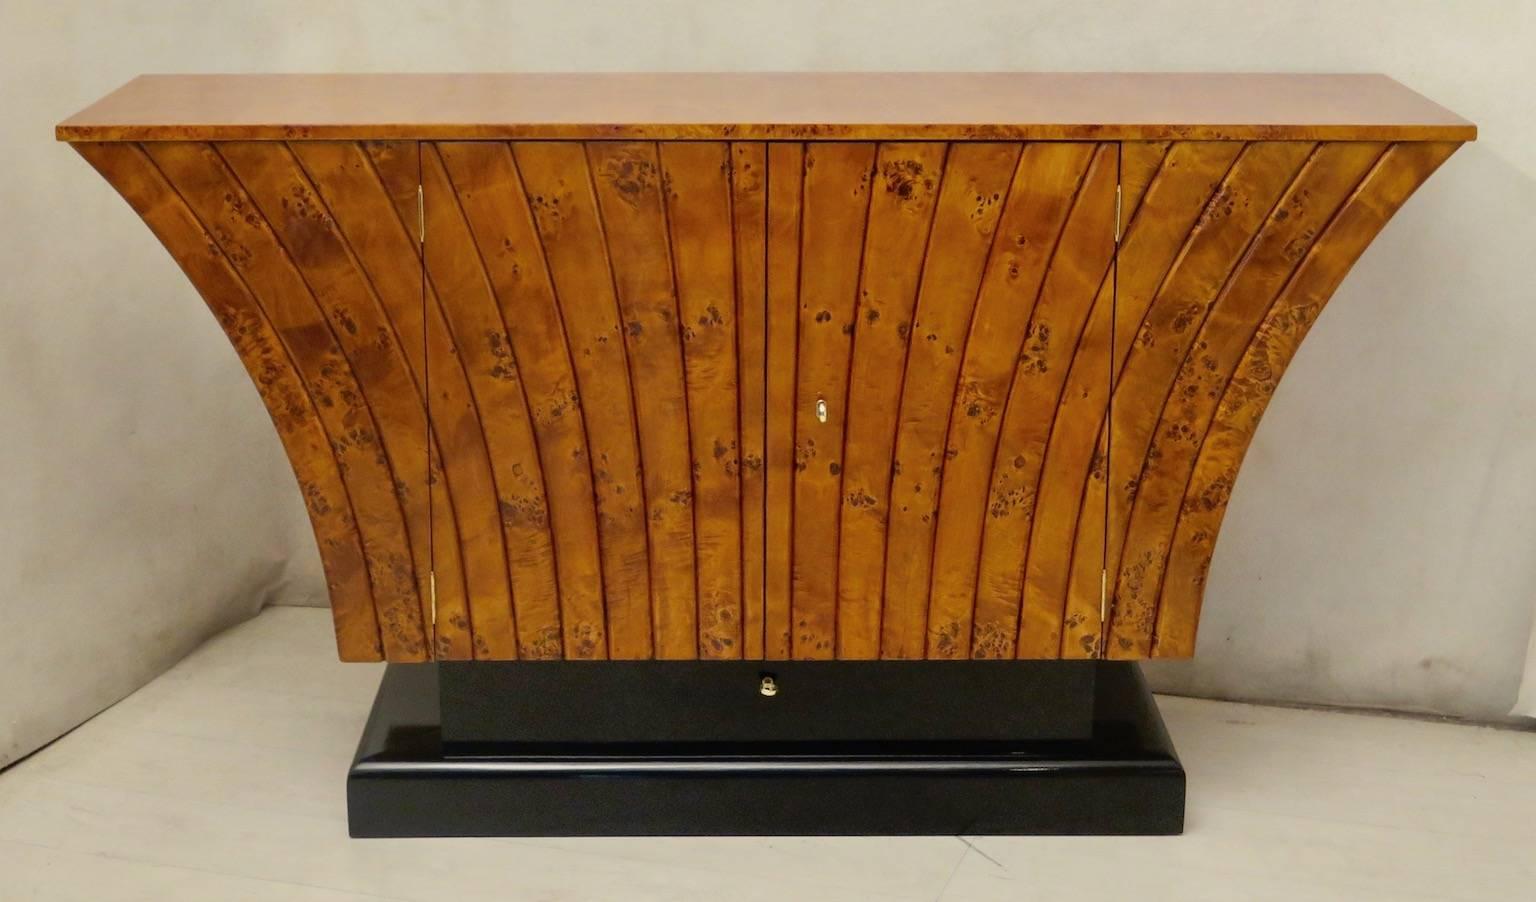 Italian Art Deco sideboard. All veneered in poplar wood. It is a very valuable wood root because it is full of knots. The top is rectangular squared, then a very particular body develops below. A series of wooden ribs develop from bottom to top, as